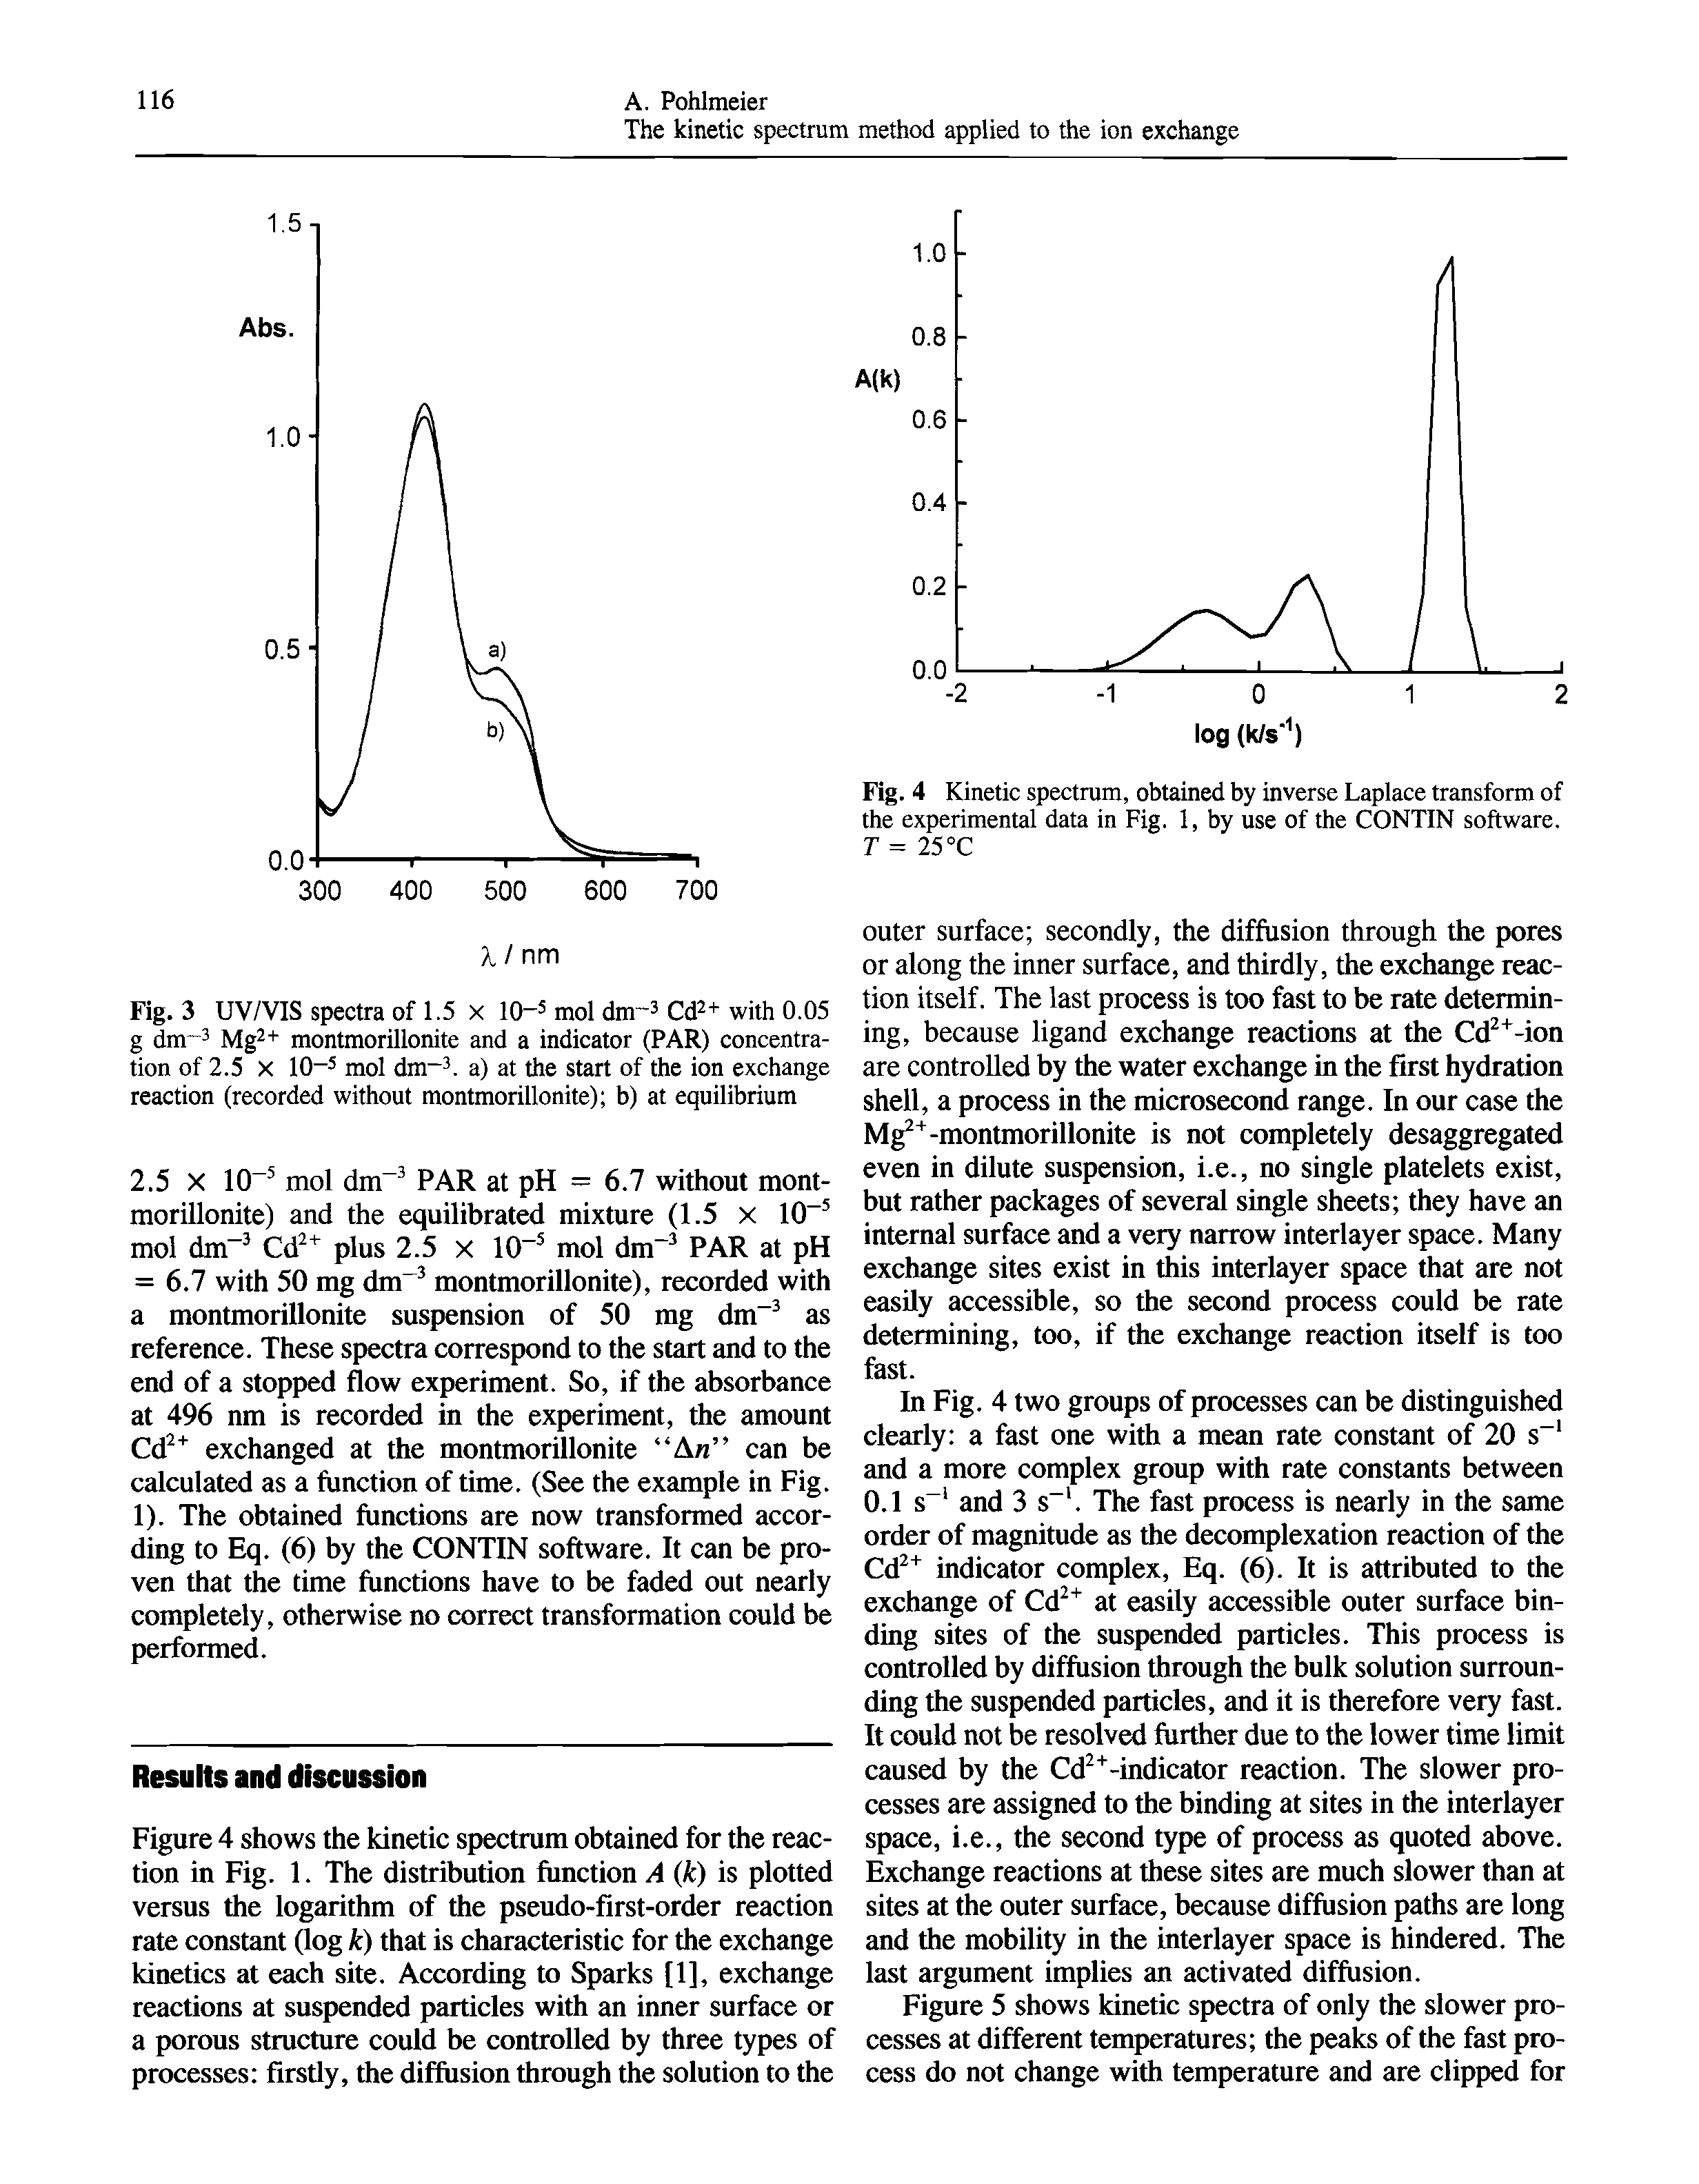 Figure 4 shows the kinetic spectrum obtained for the reaction in Fig. 1. The distribution function A (k) is plotted versus the logarithm of the pseudo-first-order reaction rate constant (log k) that is characteristic for the exchange kinetics at each site. According to Sparks [1], exchange reactions at suspended particles with an inner surface or a porous structure could be controlled by three types of processes firstly, the di sion through the solution to the...